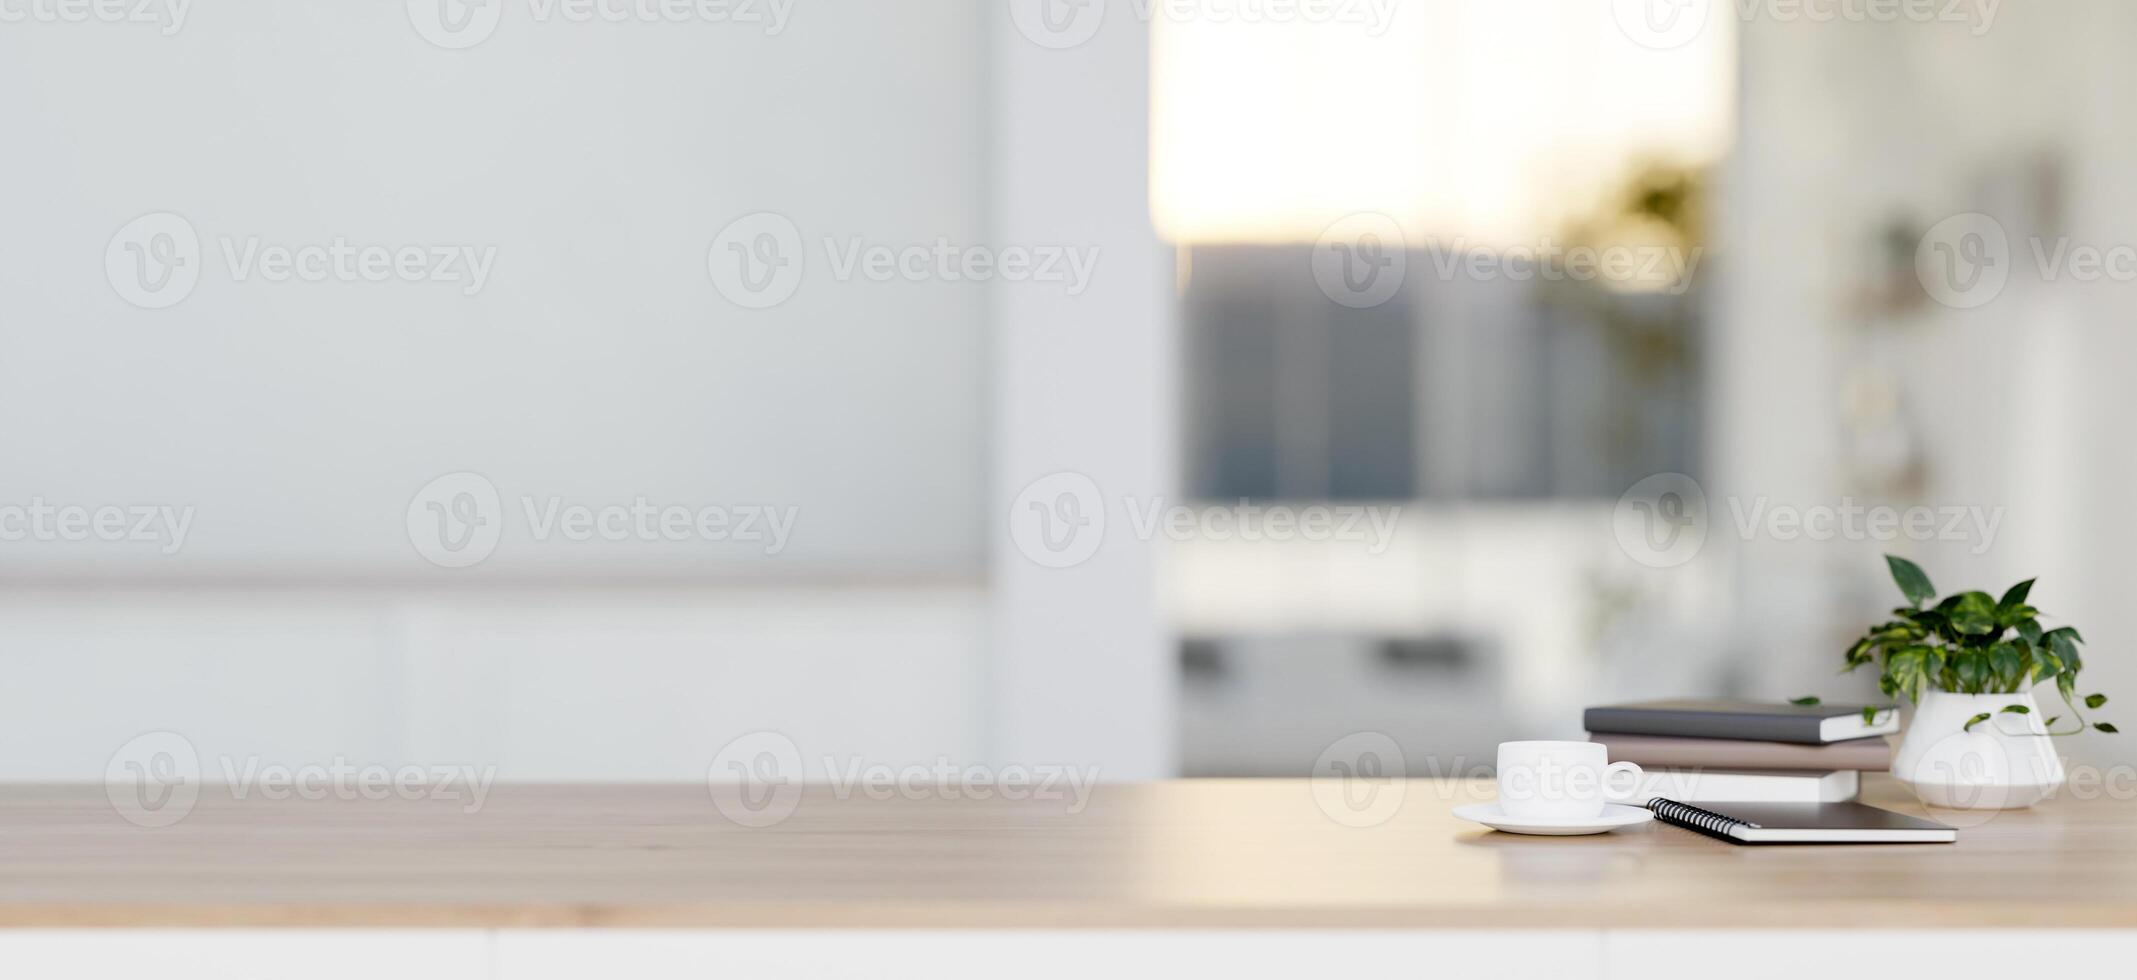 A close-up image of a wooden tabletop for display products in a minimalist white room. photo